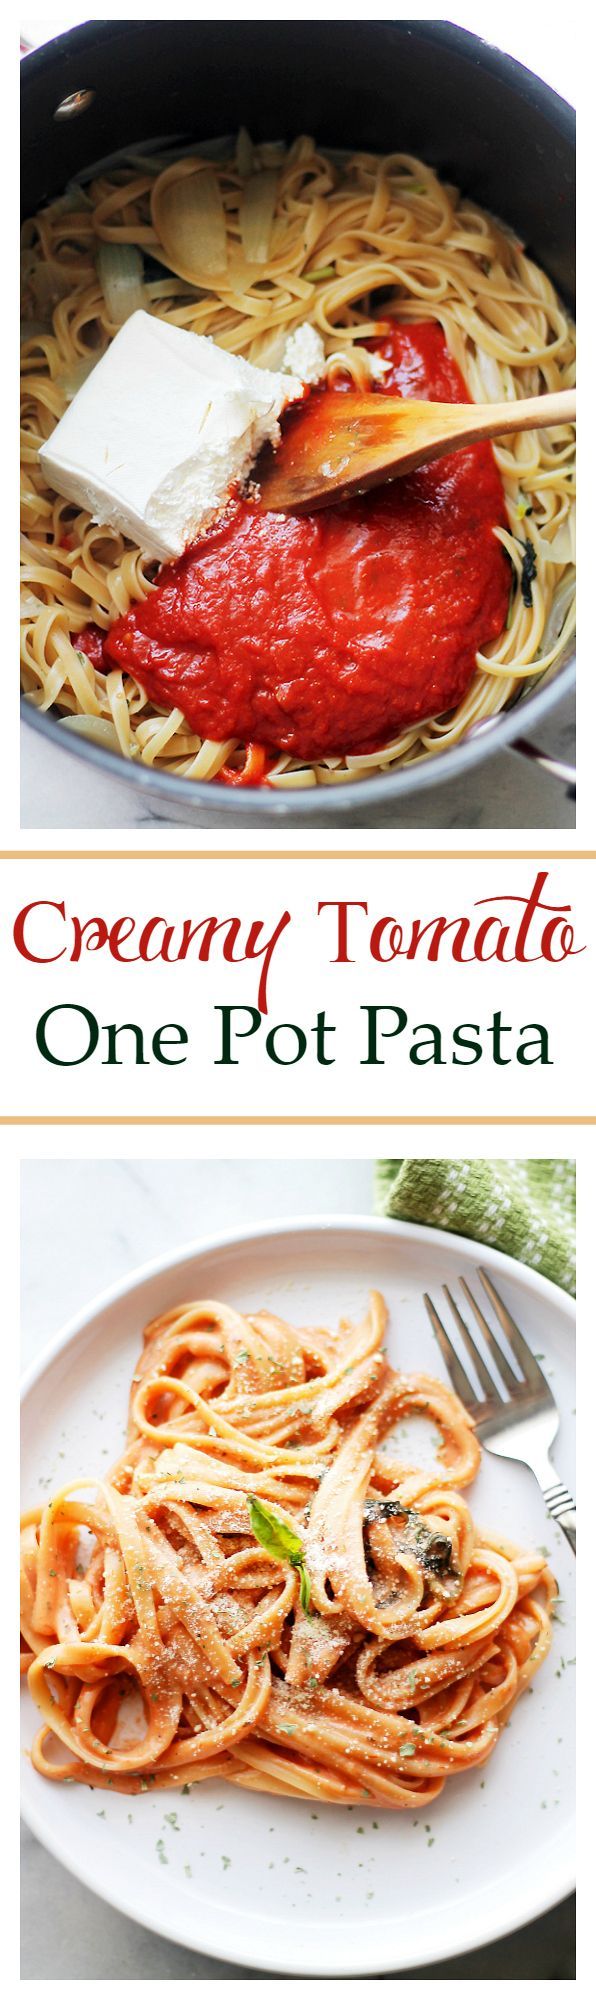 Creamy Tomato One Pot Pasta – The easiest and creamiest pasta without the cream! It all happens in the sam